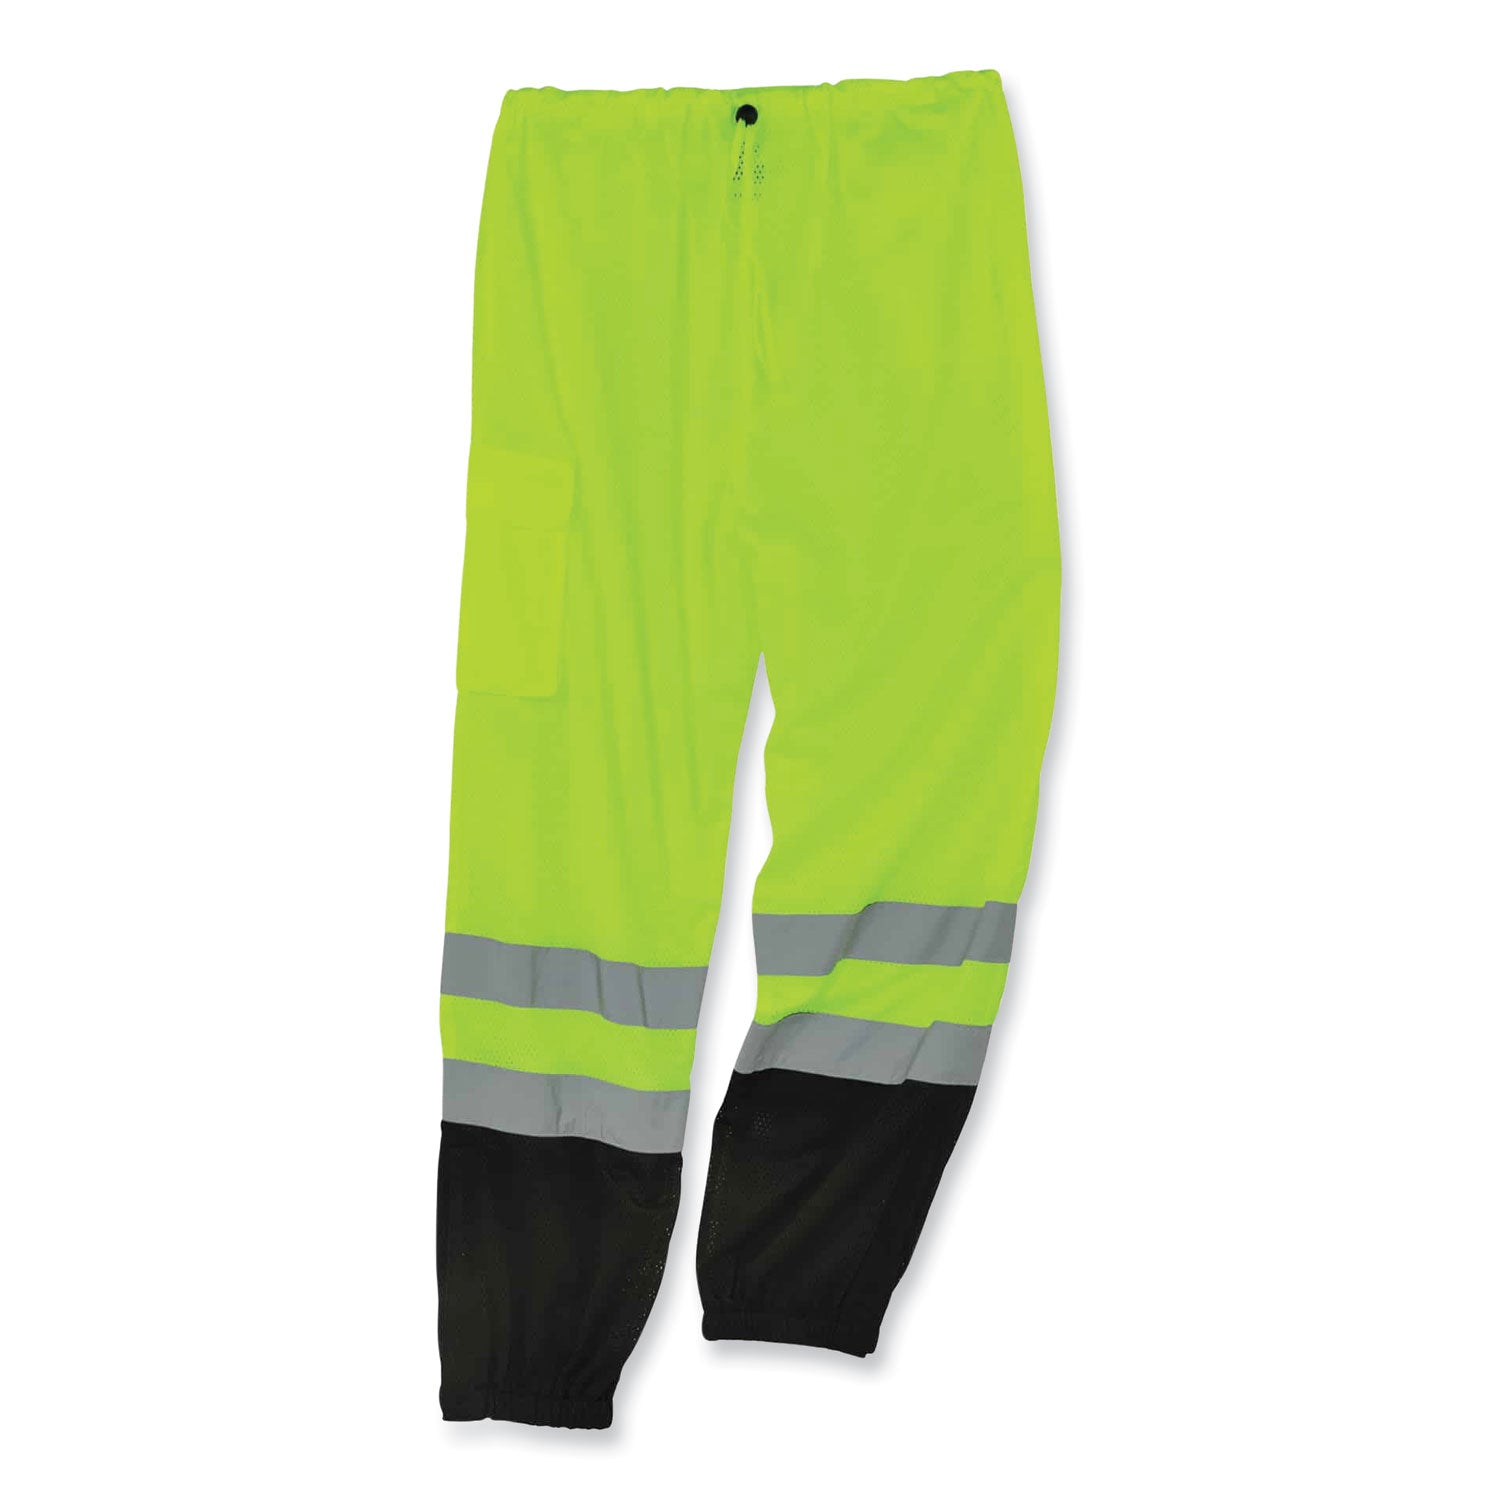 glowear-8910bk-class-e-hi-vis-pants-with-black-bottom-polyester-2x-large-3x-large-lime-ships-in-1-3-business-days_ego23957 - 1